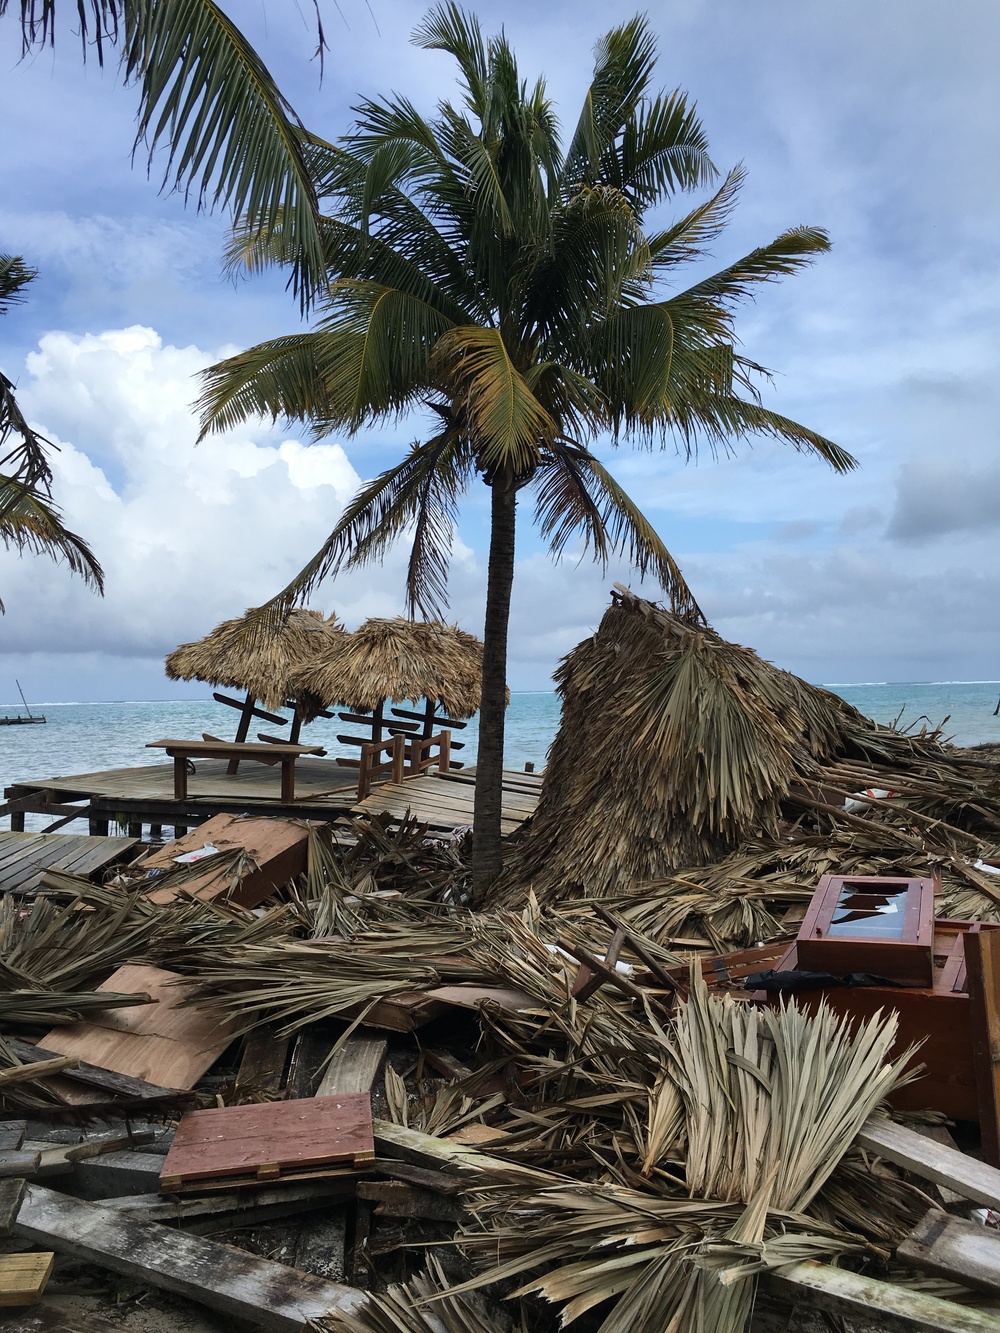 Aftermath of Hurricane Earl on Ambergris Caye